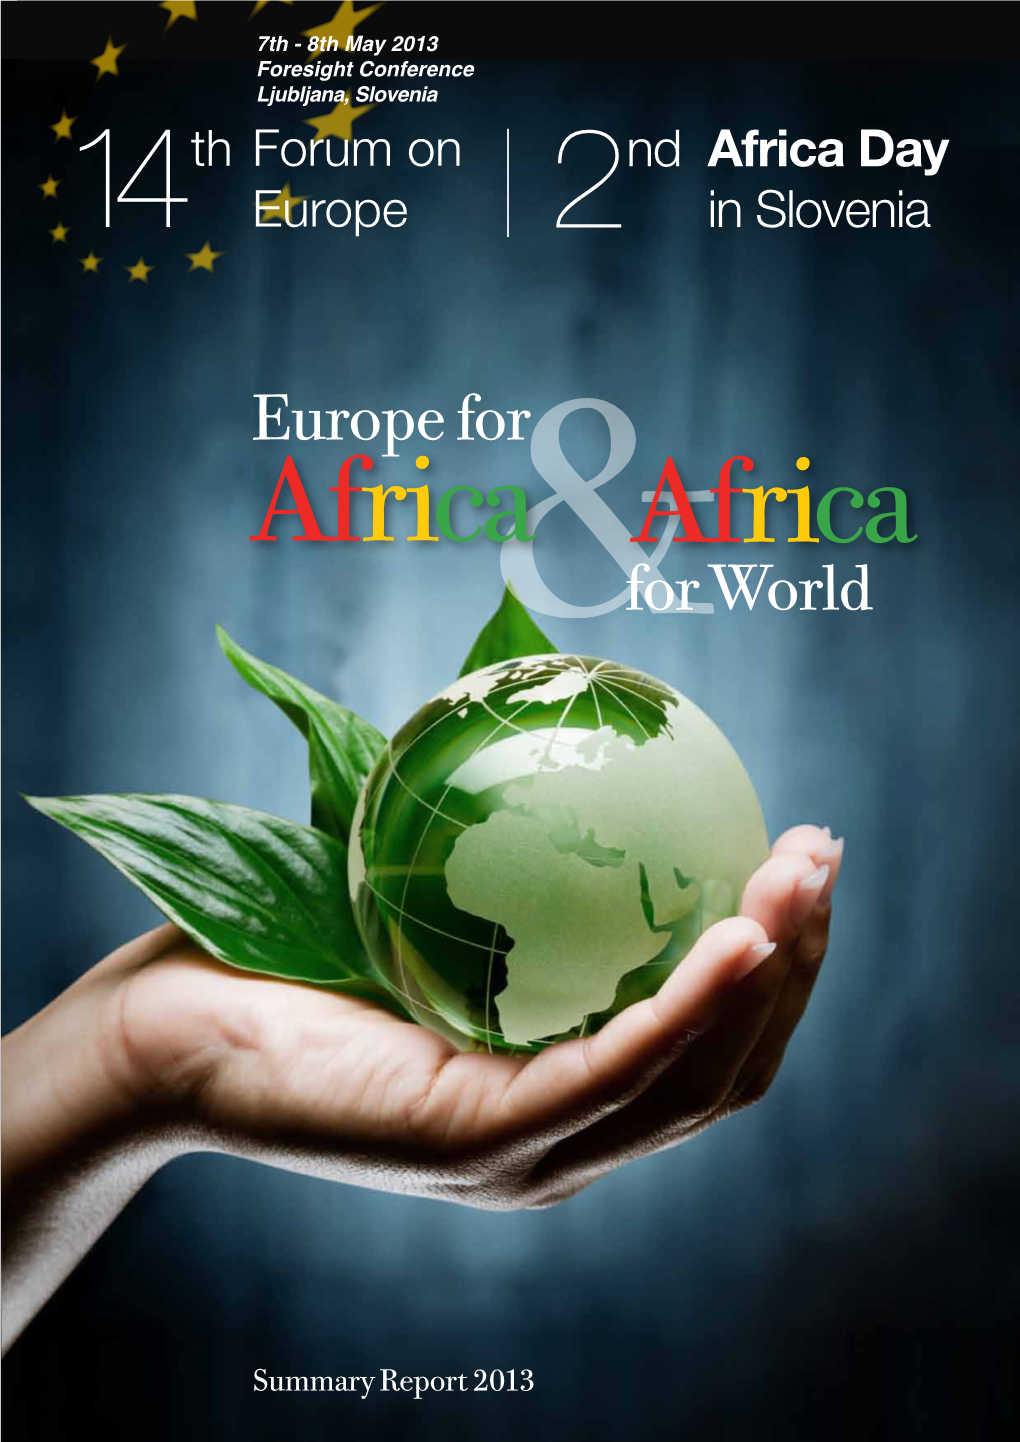 Europe for Africa & Africa for World